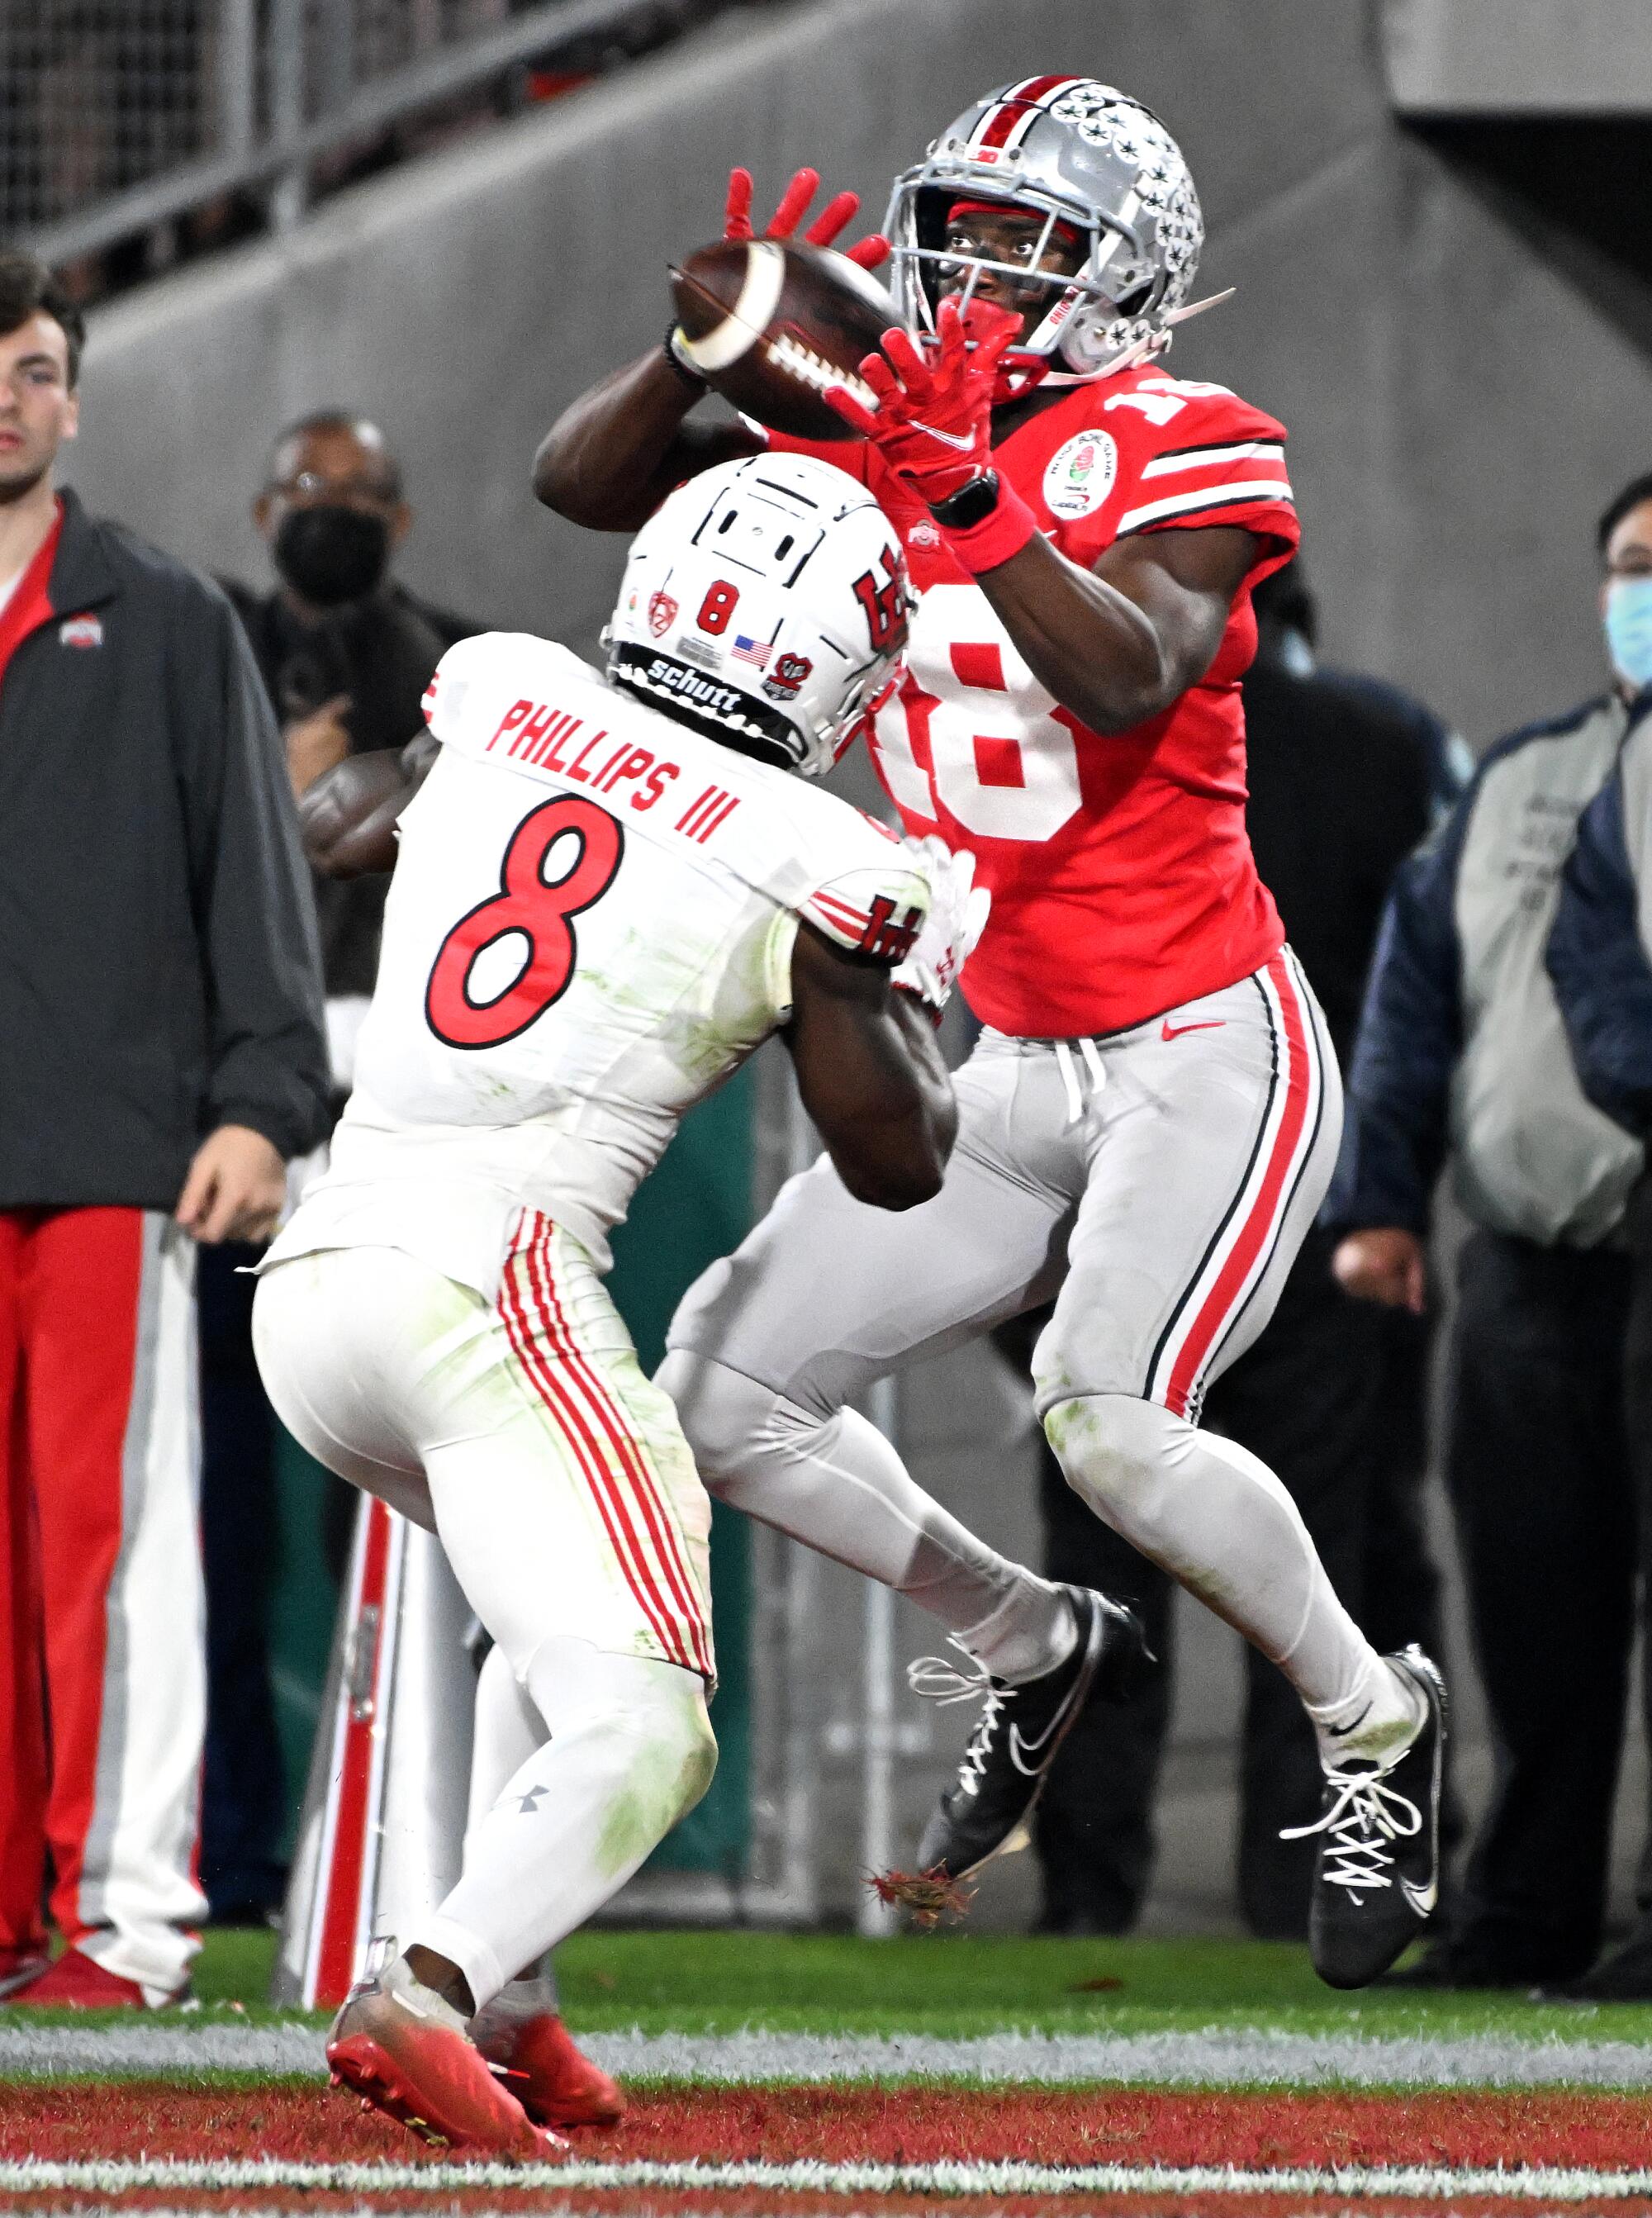  Ohio State receiver Marvin Harrison Jr. catches a touchdown pass.